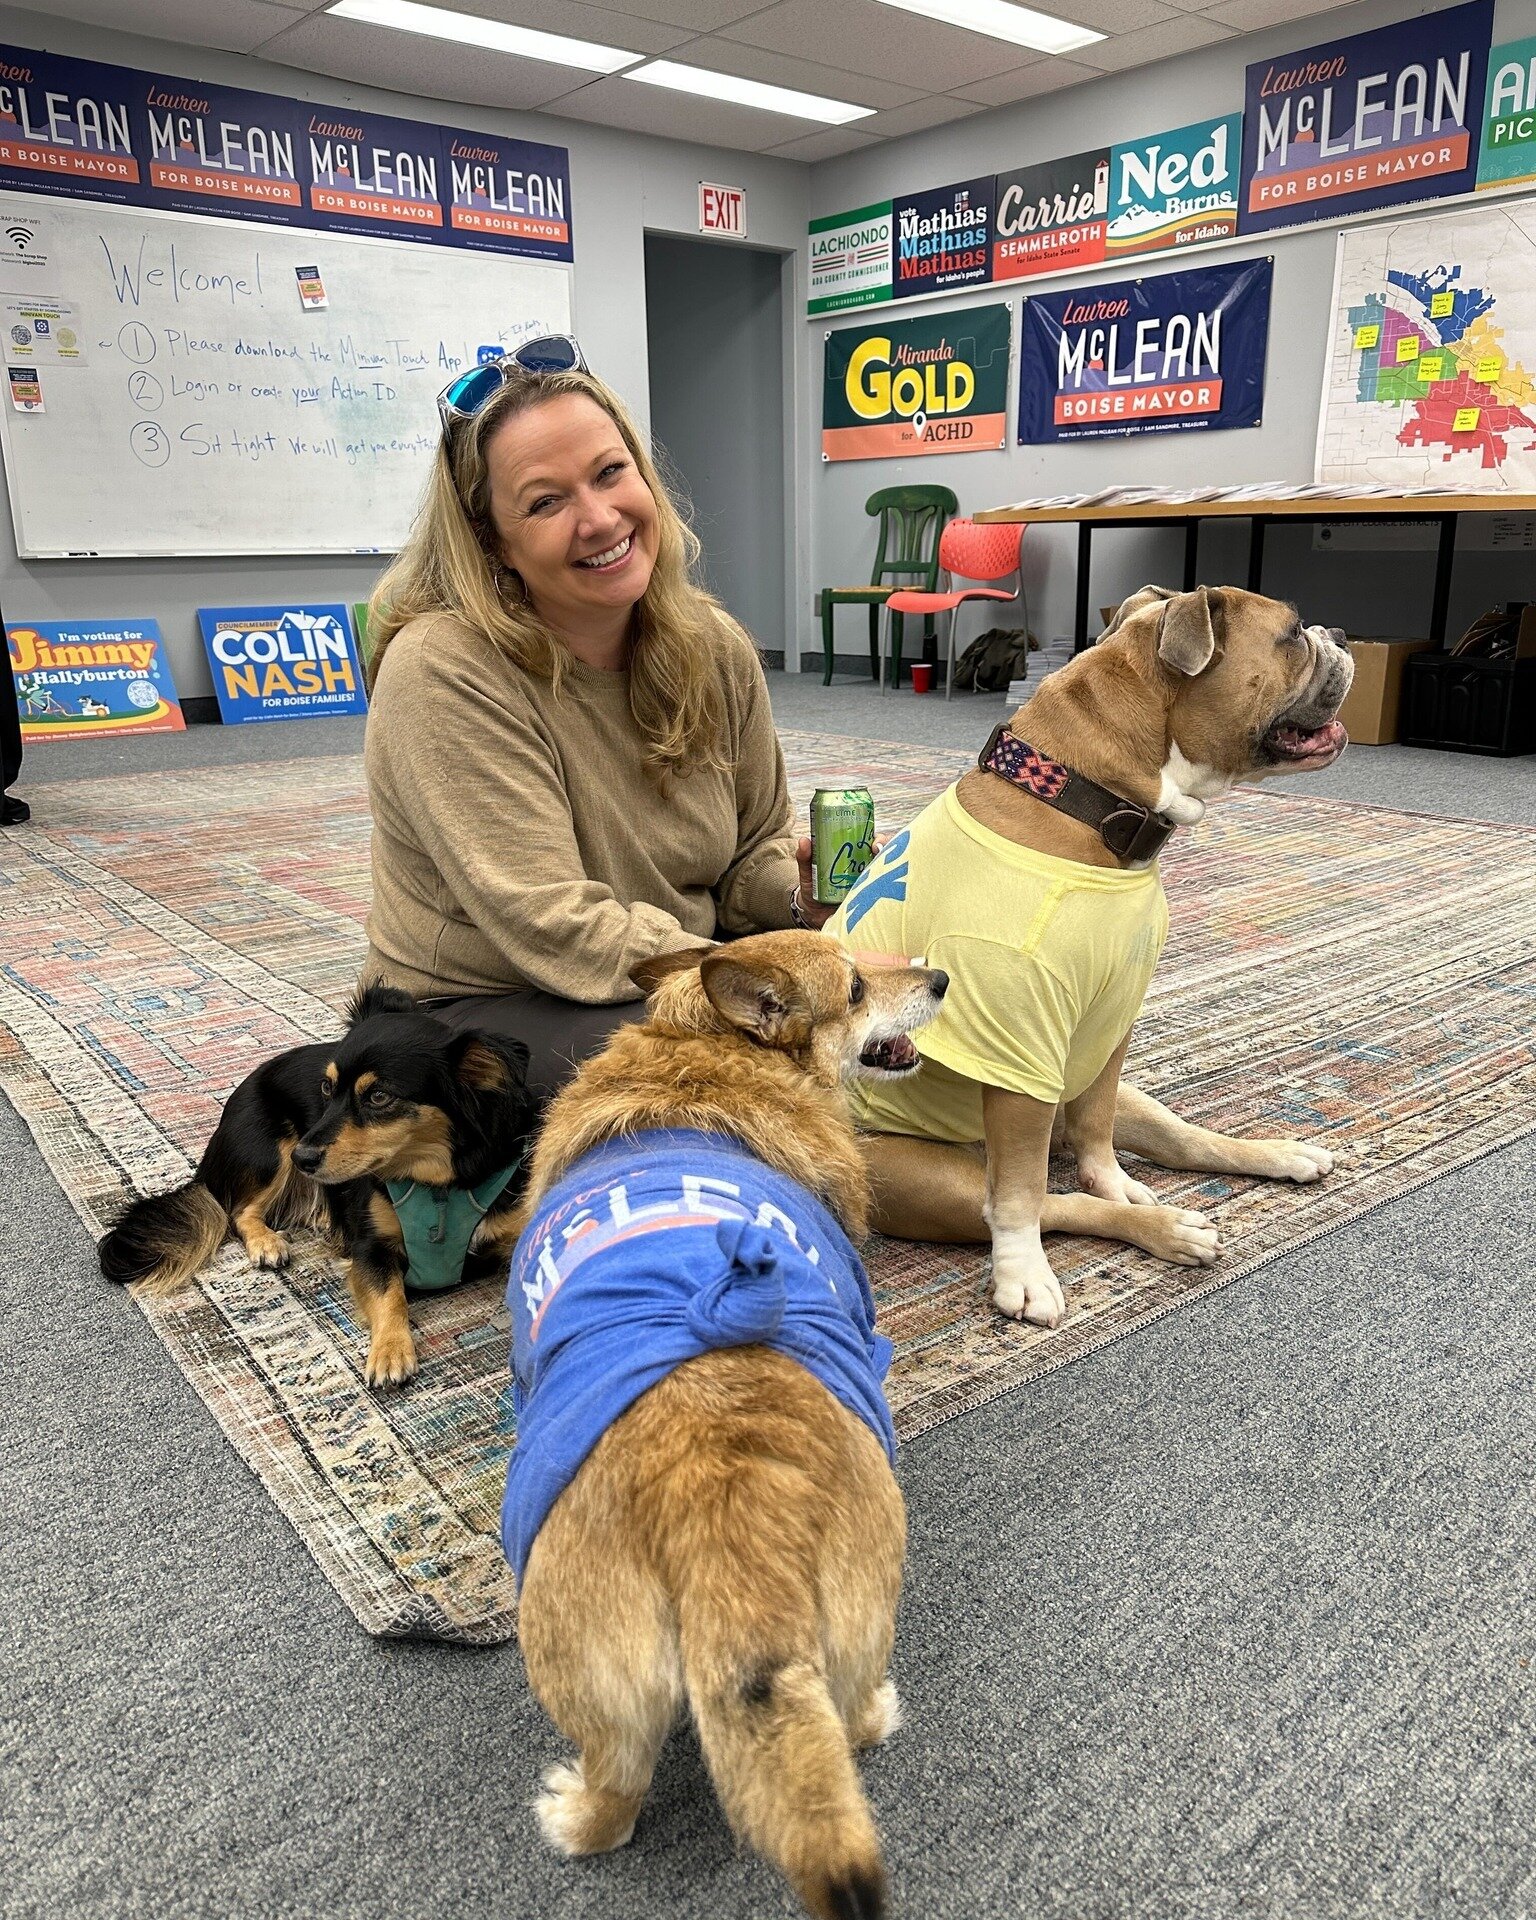 Took a little break between turfs to pet some pups! 🐾

We have so many perks for volunteers at campaign HQ &mdash; tons of tasty treats, hot and cold beverages, and the best puppers around. We only have two more days to go. Come knock with us! Link 